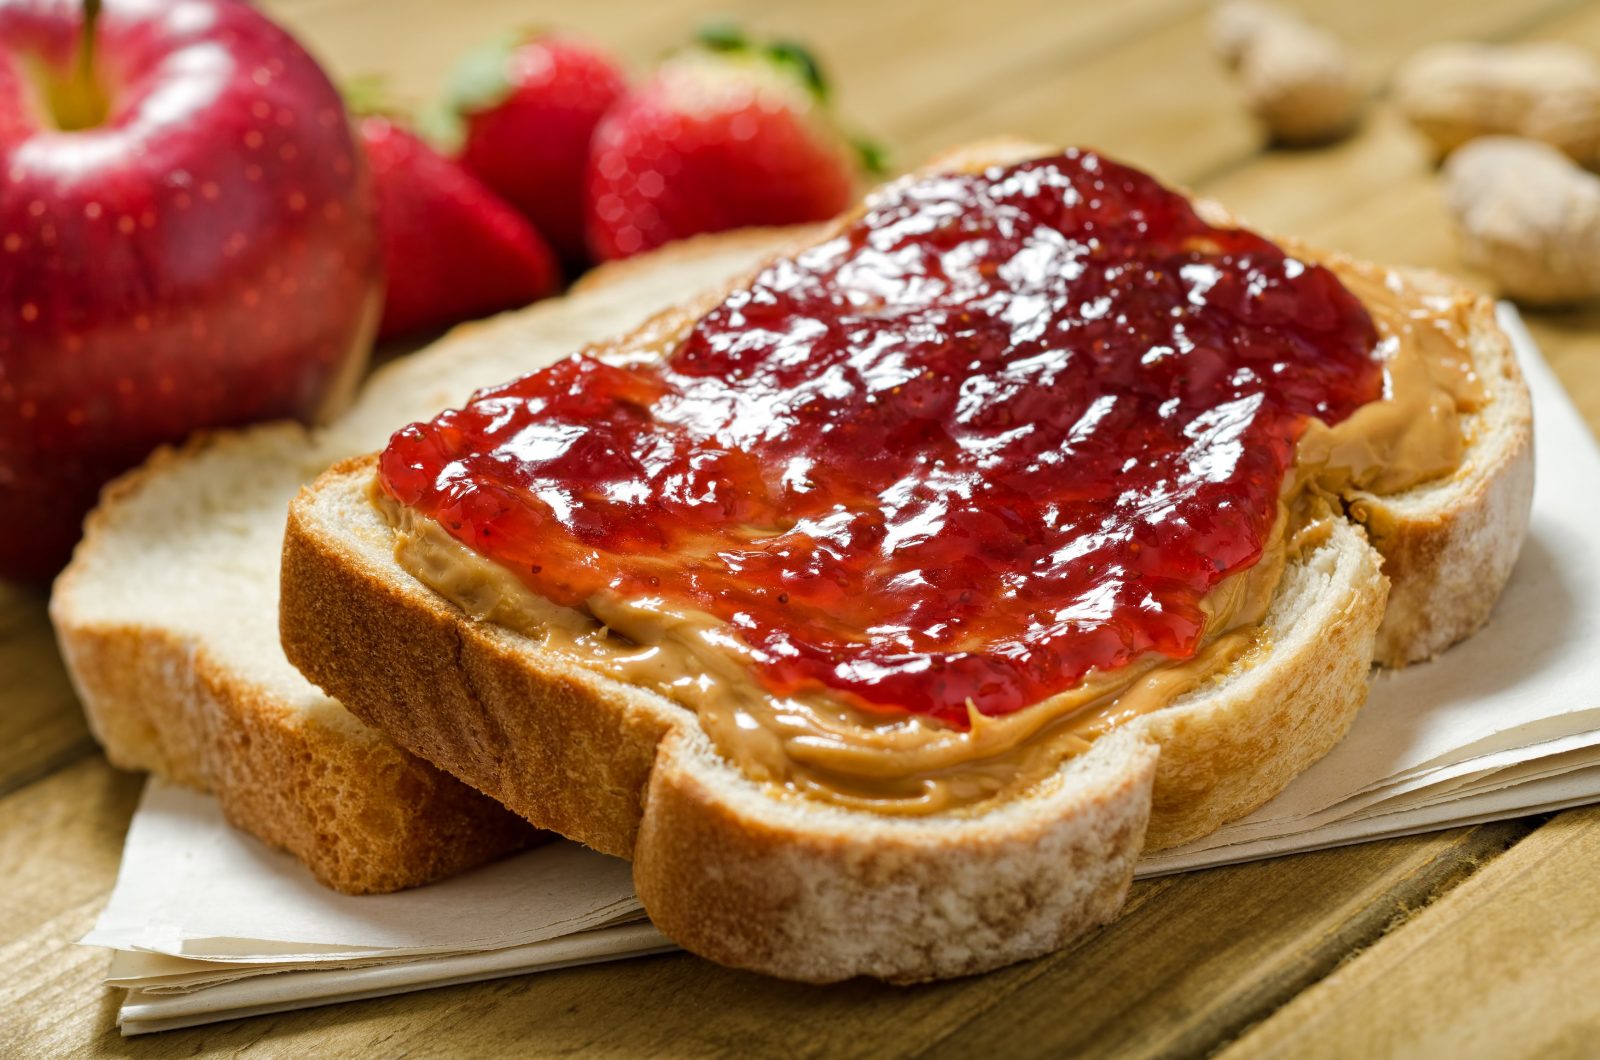 Stop Everything and See If You Can Ace This 24-Question General Knowledge Quiz Peanut butter and jelly sandwich